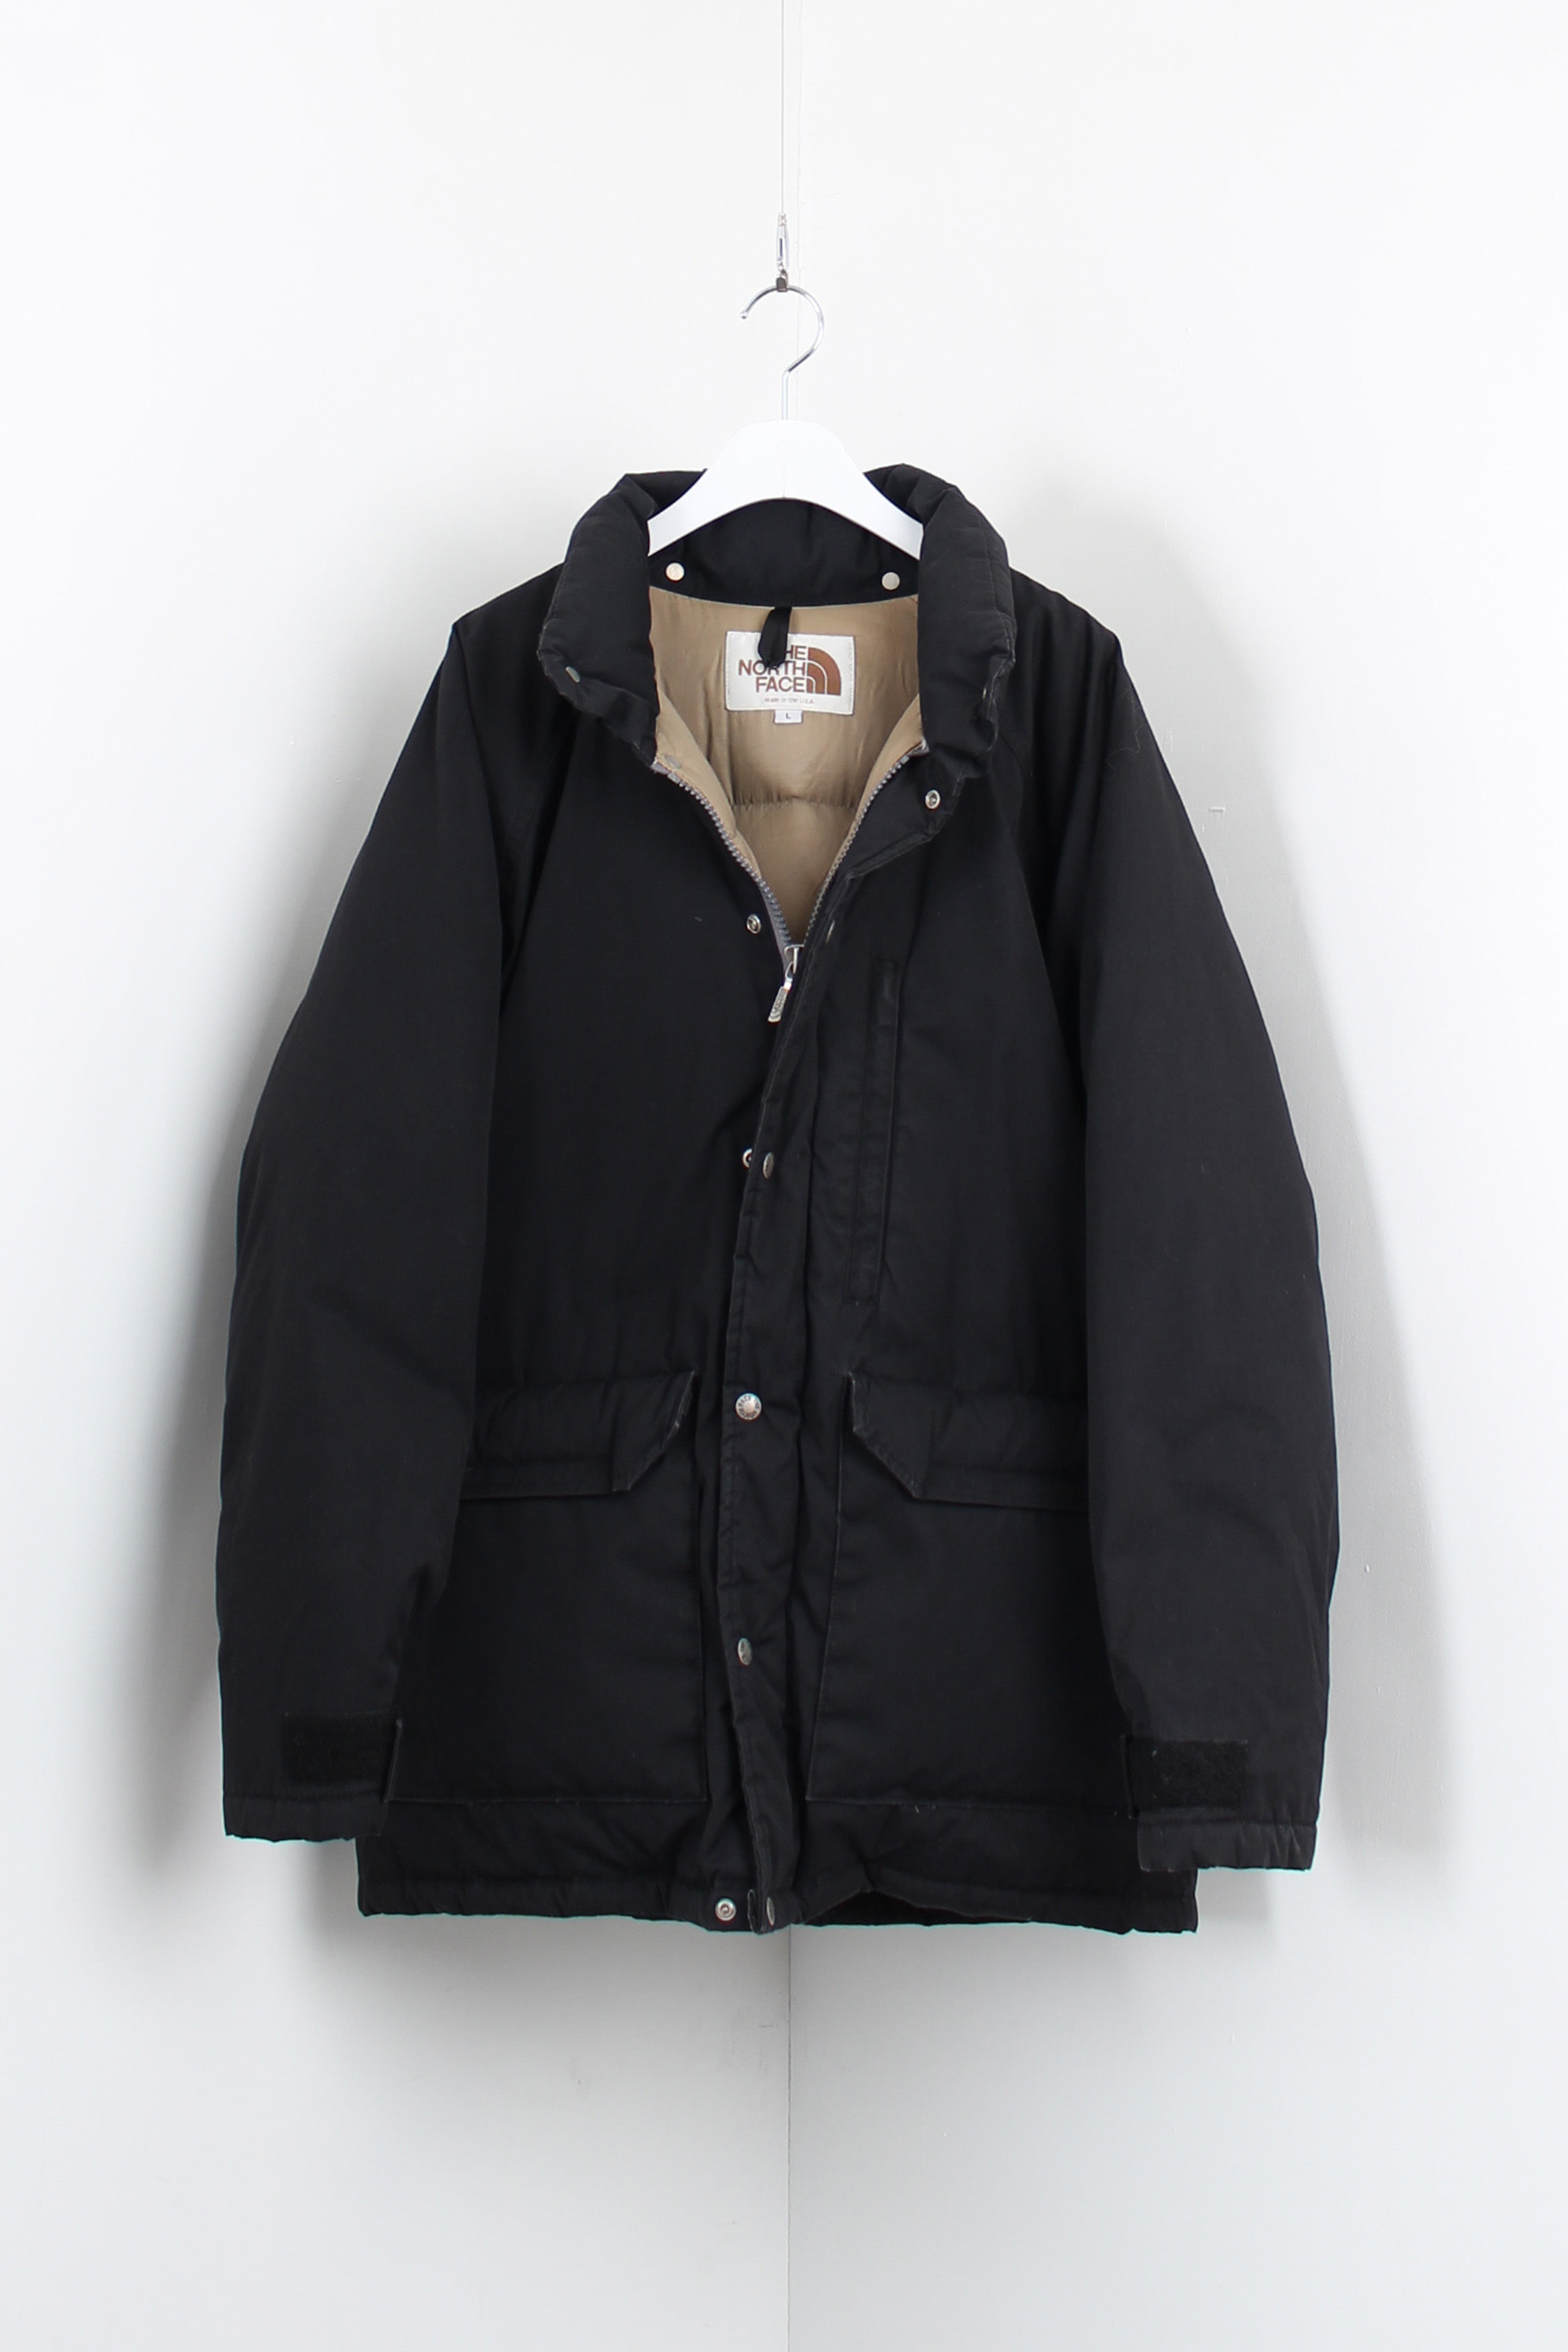 THE NORTH FACE brown label down jacket